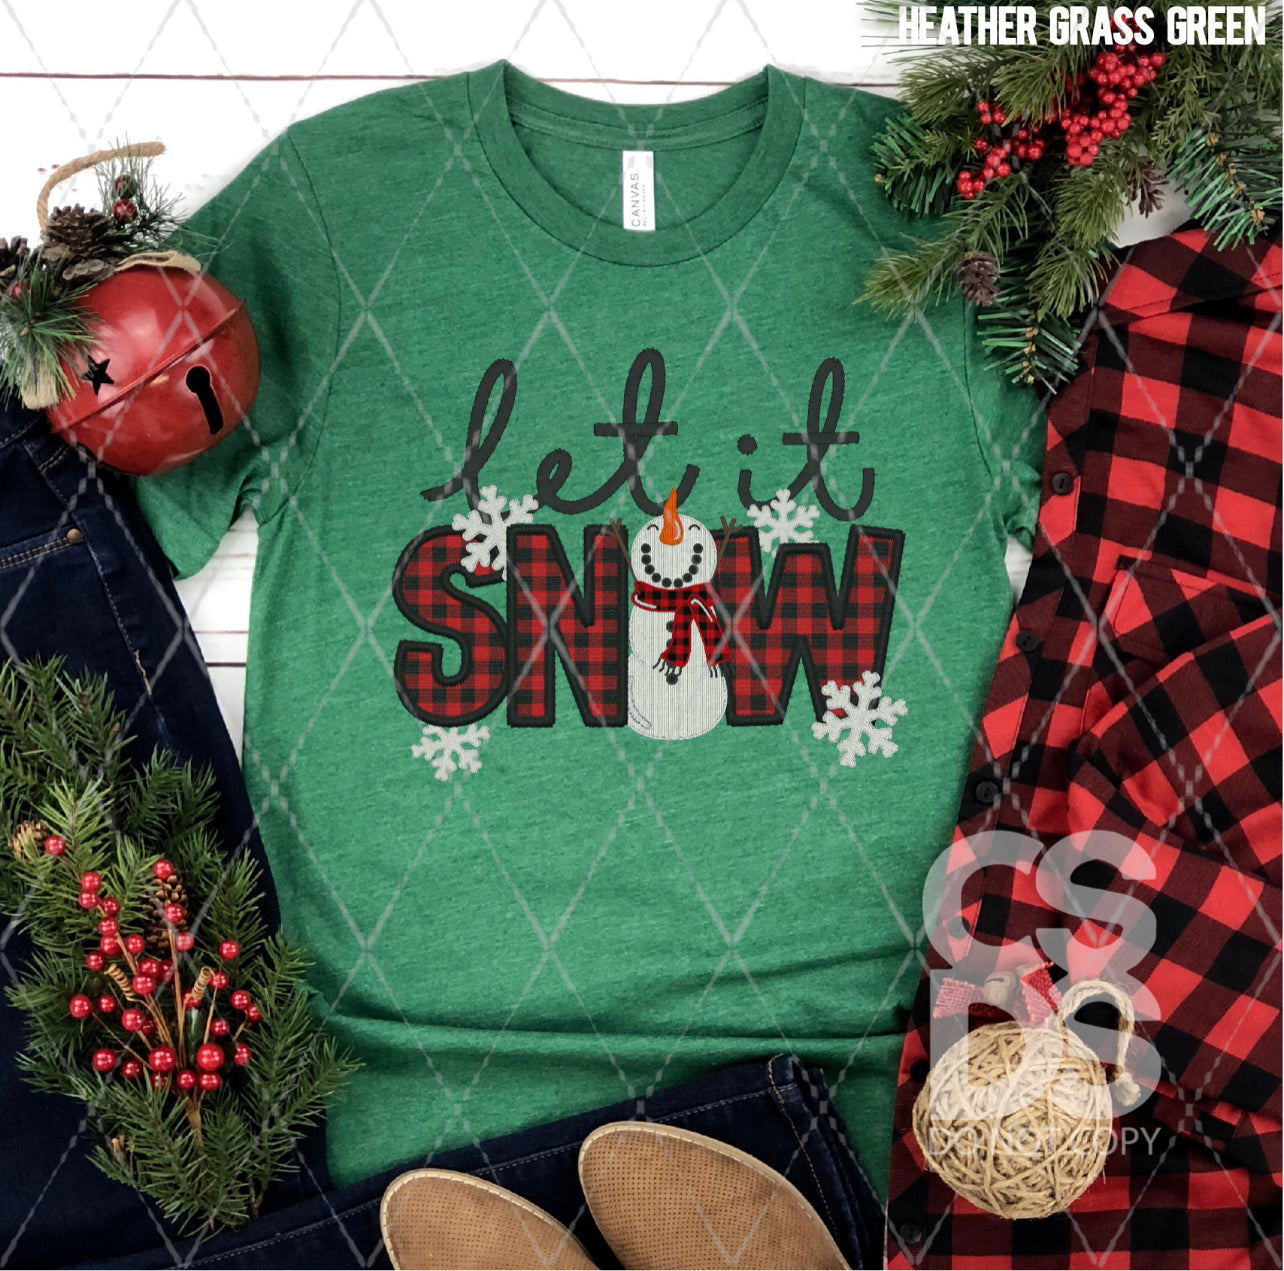 Let it Snow with Buffalo Plaid